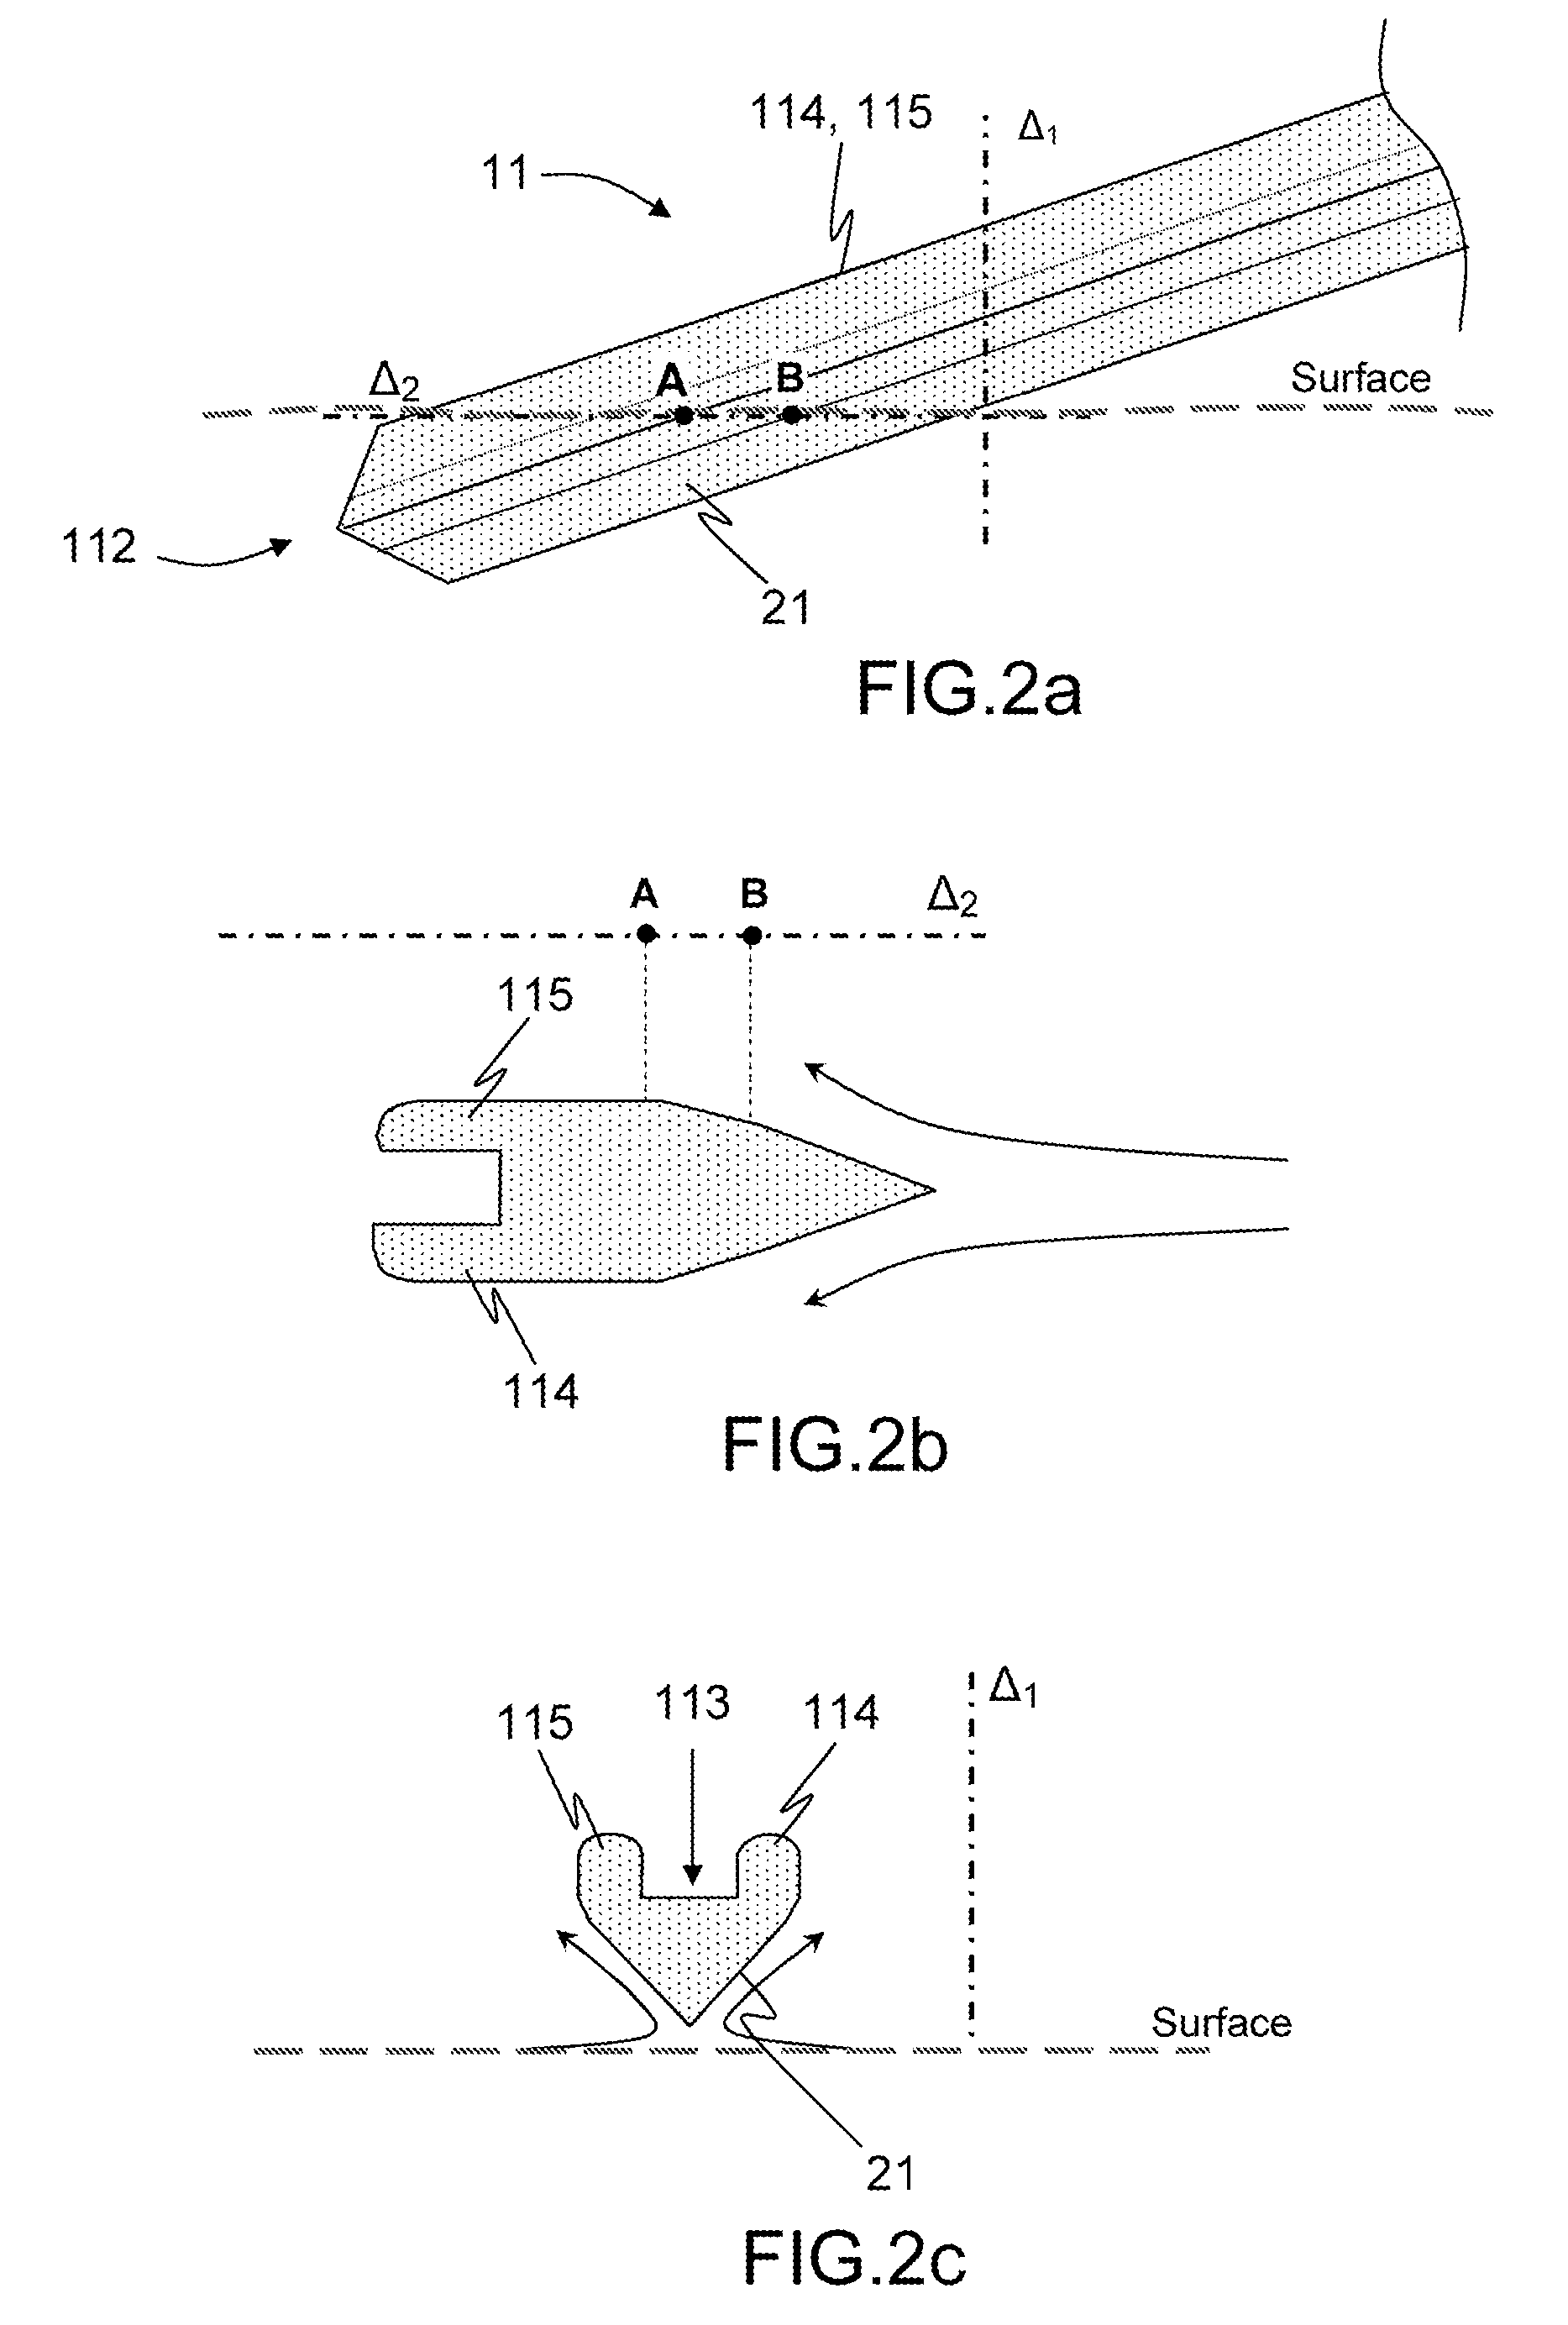 System for launching and recovering underwater vehicles, notably towed underwater vehicles